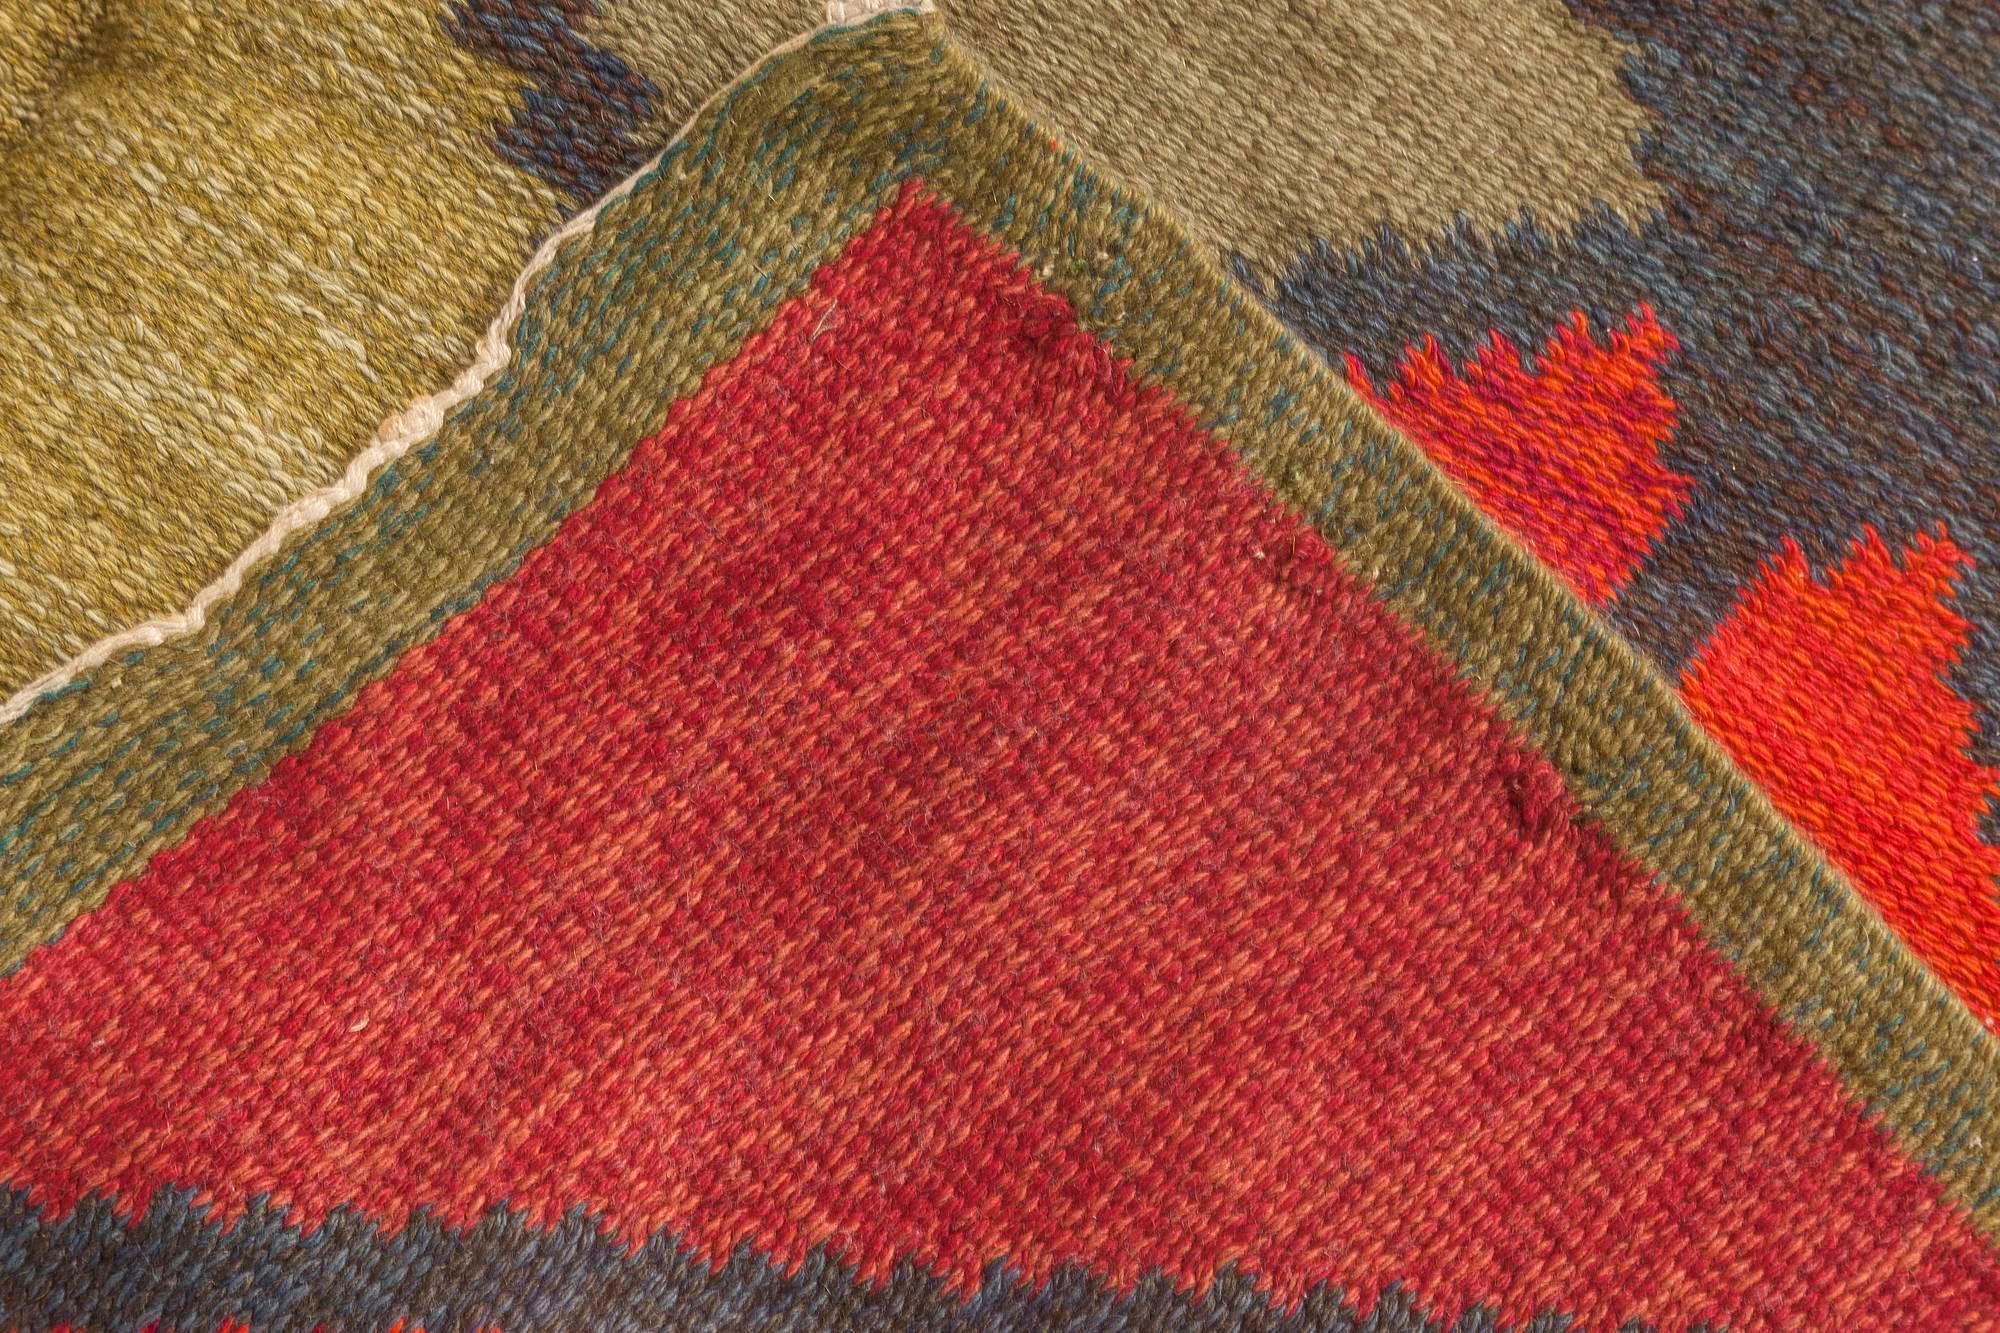 Vintage Swedish Red Diamond Flat-Weave Rug, Sverige Riolakan by Polly Bjorkm In Good Condition For Sale In New York, NY